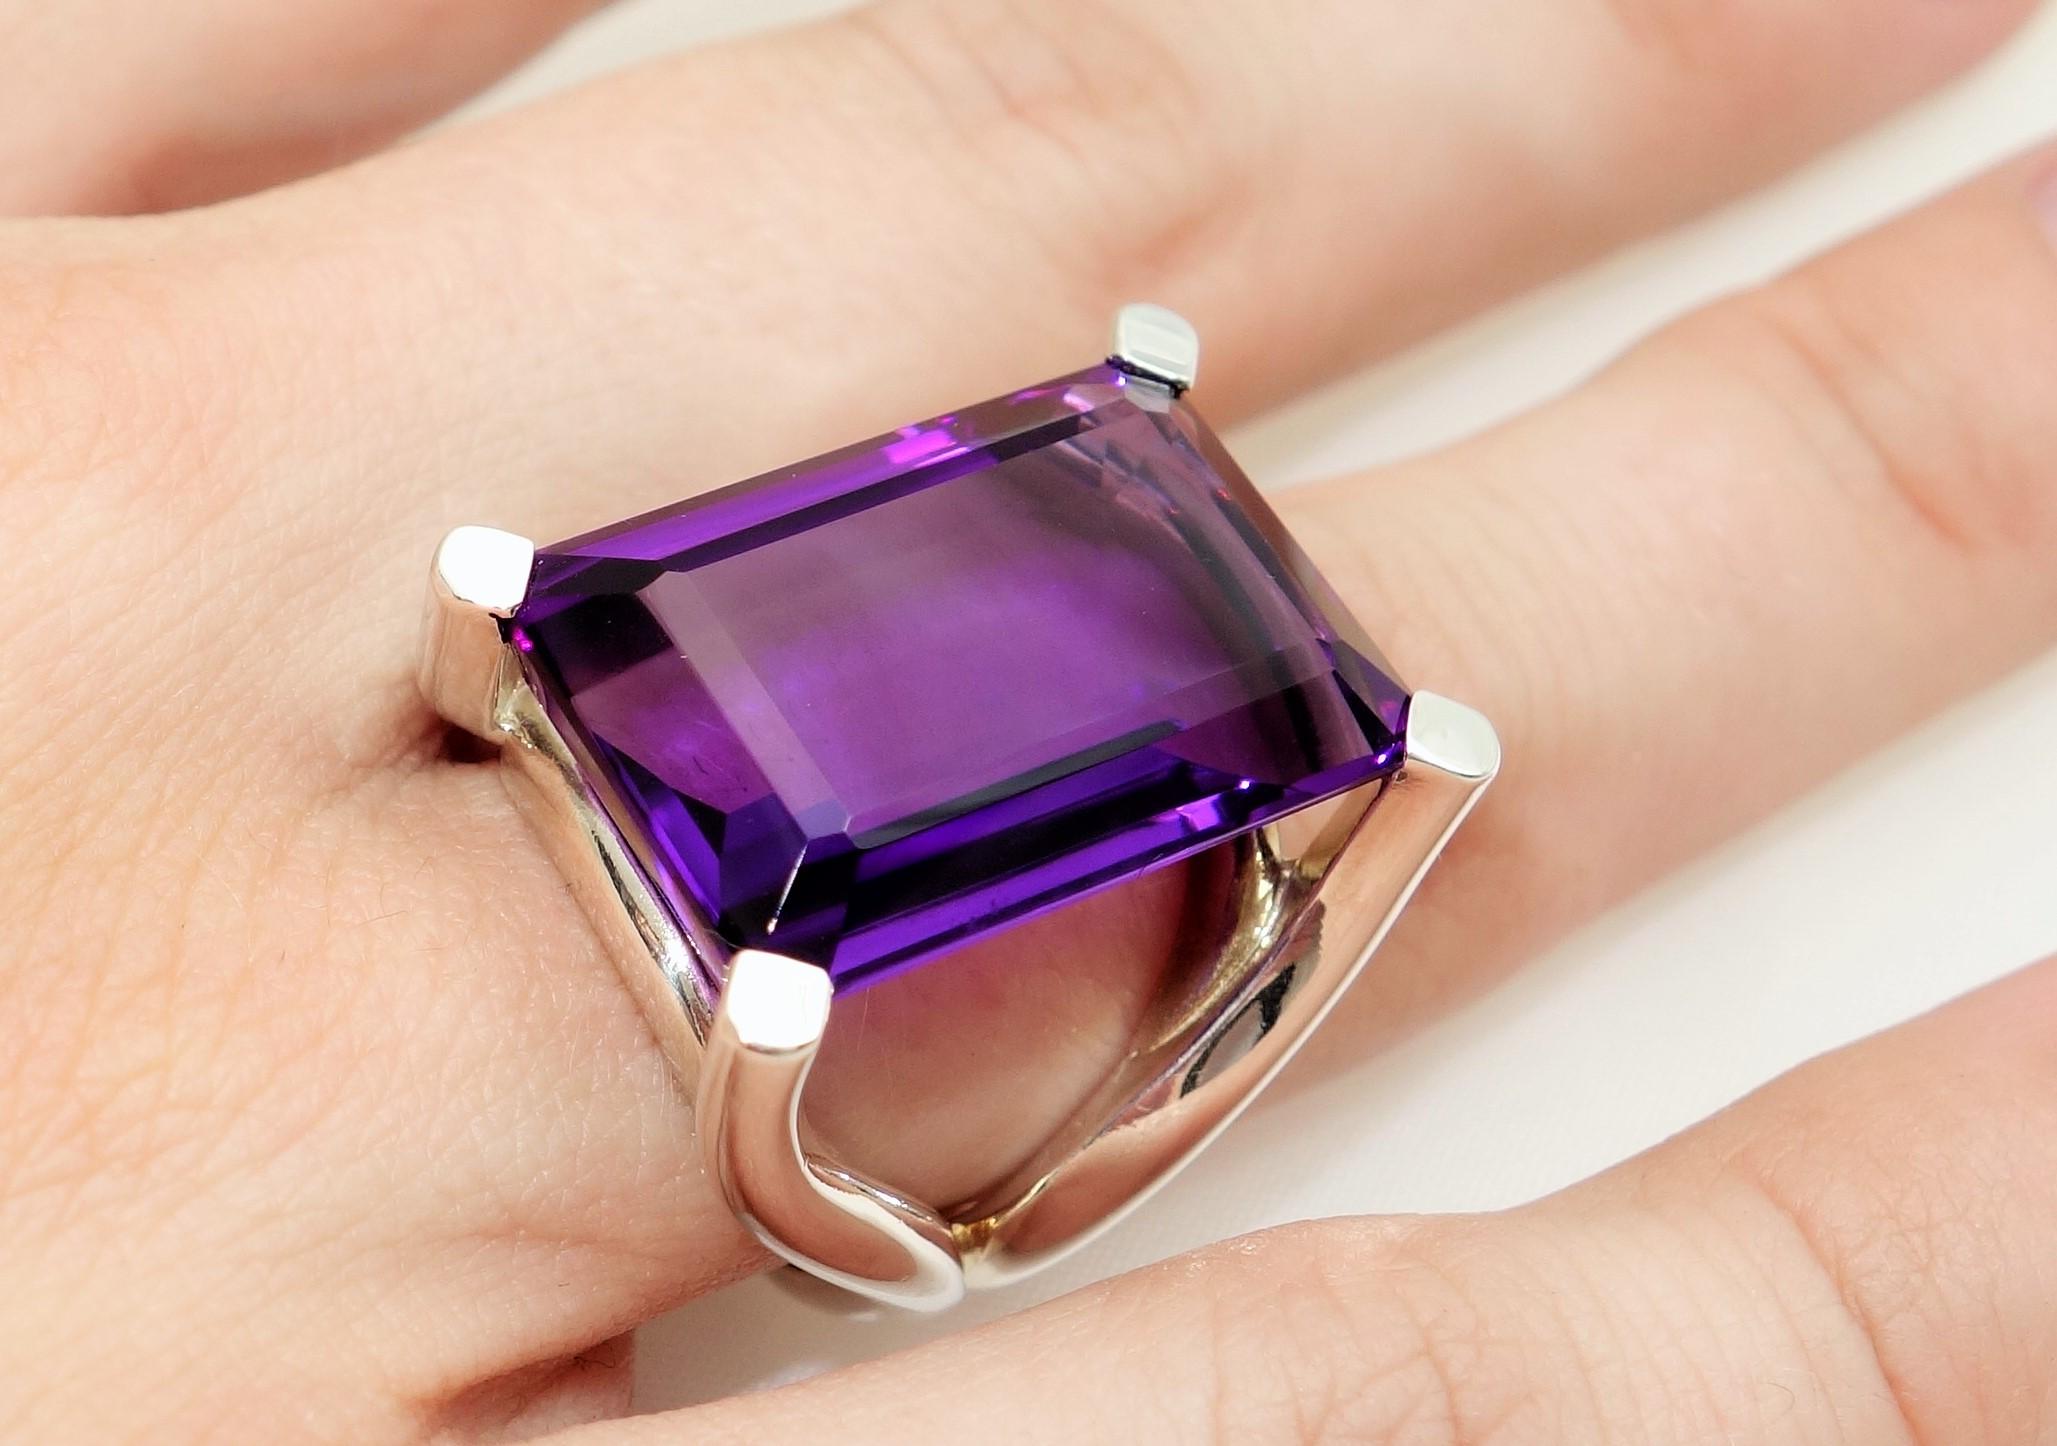 Simply Beautiful Solitaire Ring featuring a 27.11 Carat Rectangular Amethyst Gem stone. Oxidized Sterling Silver Tarnish-resistant mounting; Size 7, we offer ring re-sizing. Stylish and Classy…illuminating your look with Timeless Beauty! 
